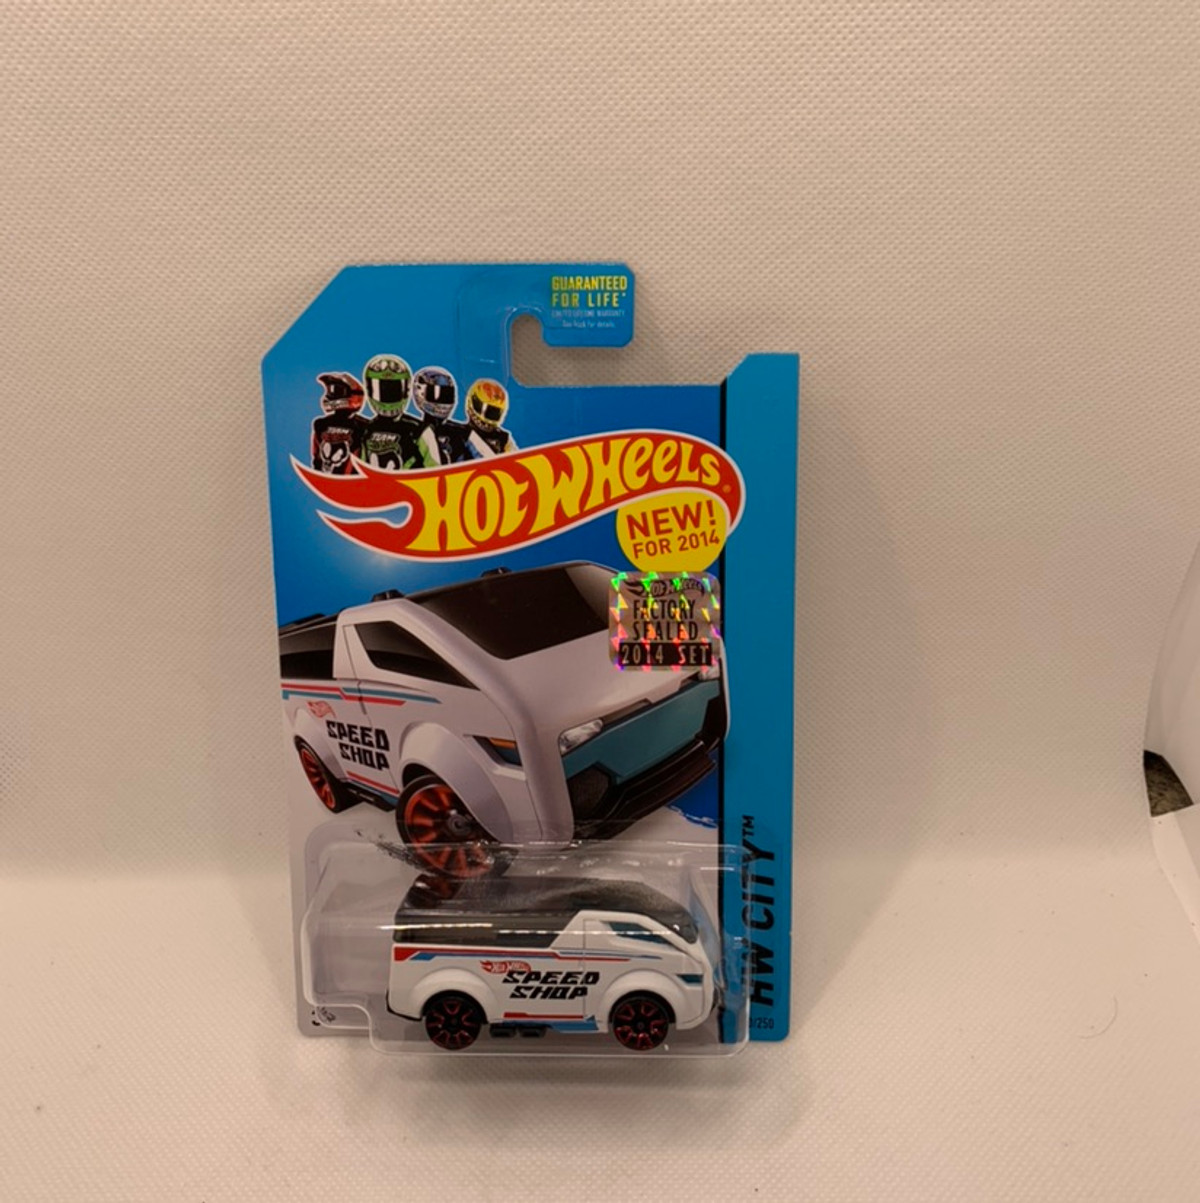 2014 Hot wheels The Vanster White Version With Factory Set Sticker 